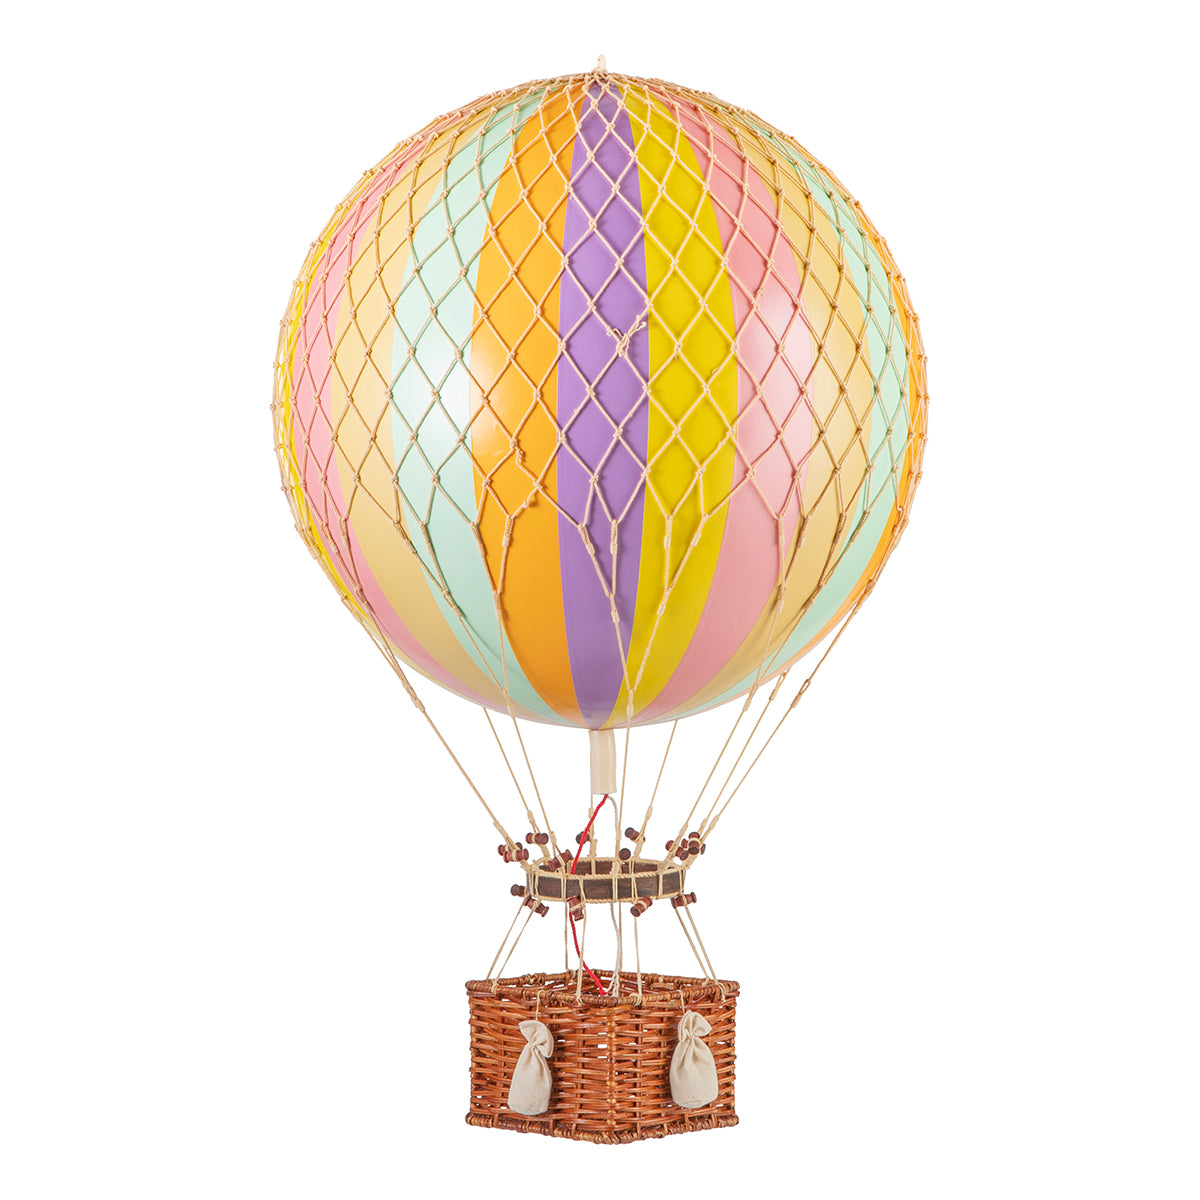 A colorful Wonderen Large Hot Air Balloon - Jules Verne adorned with Jules Verne-inspired decoration, featuring a basket suspended below.